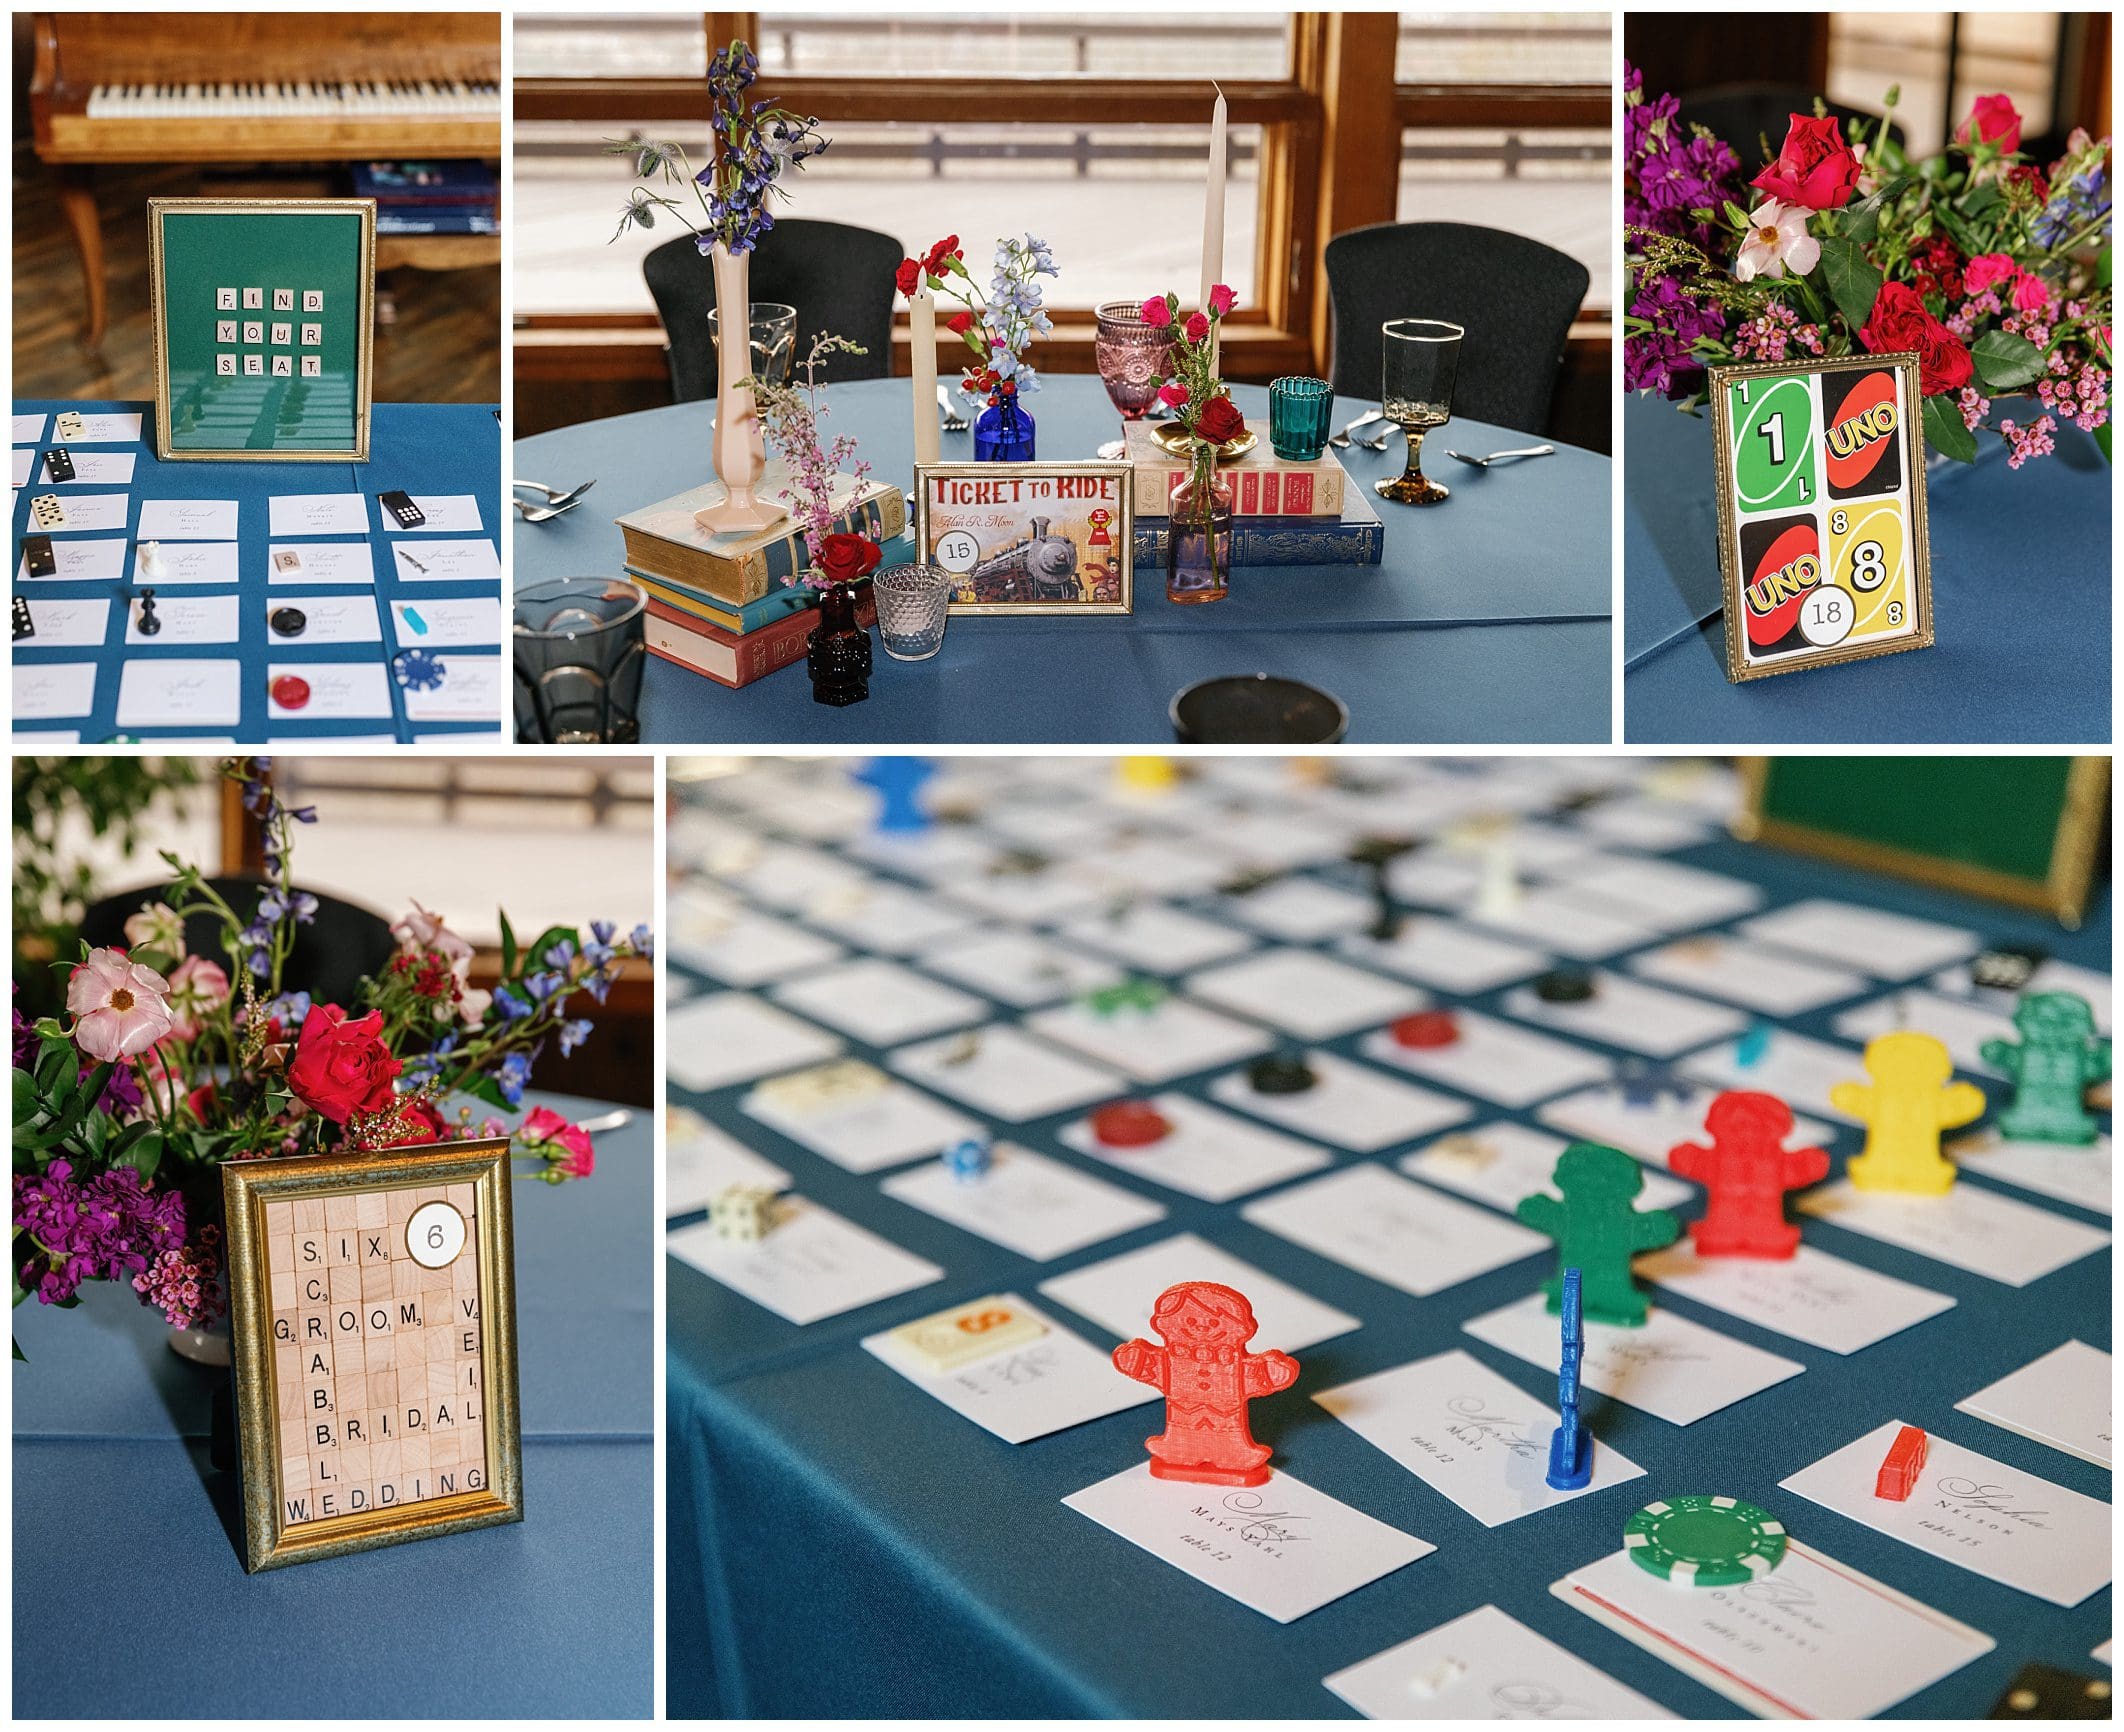 A collage of pictures of a table with cards and flowers.